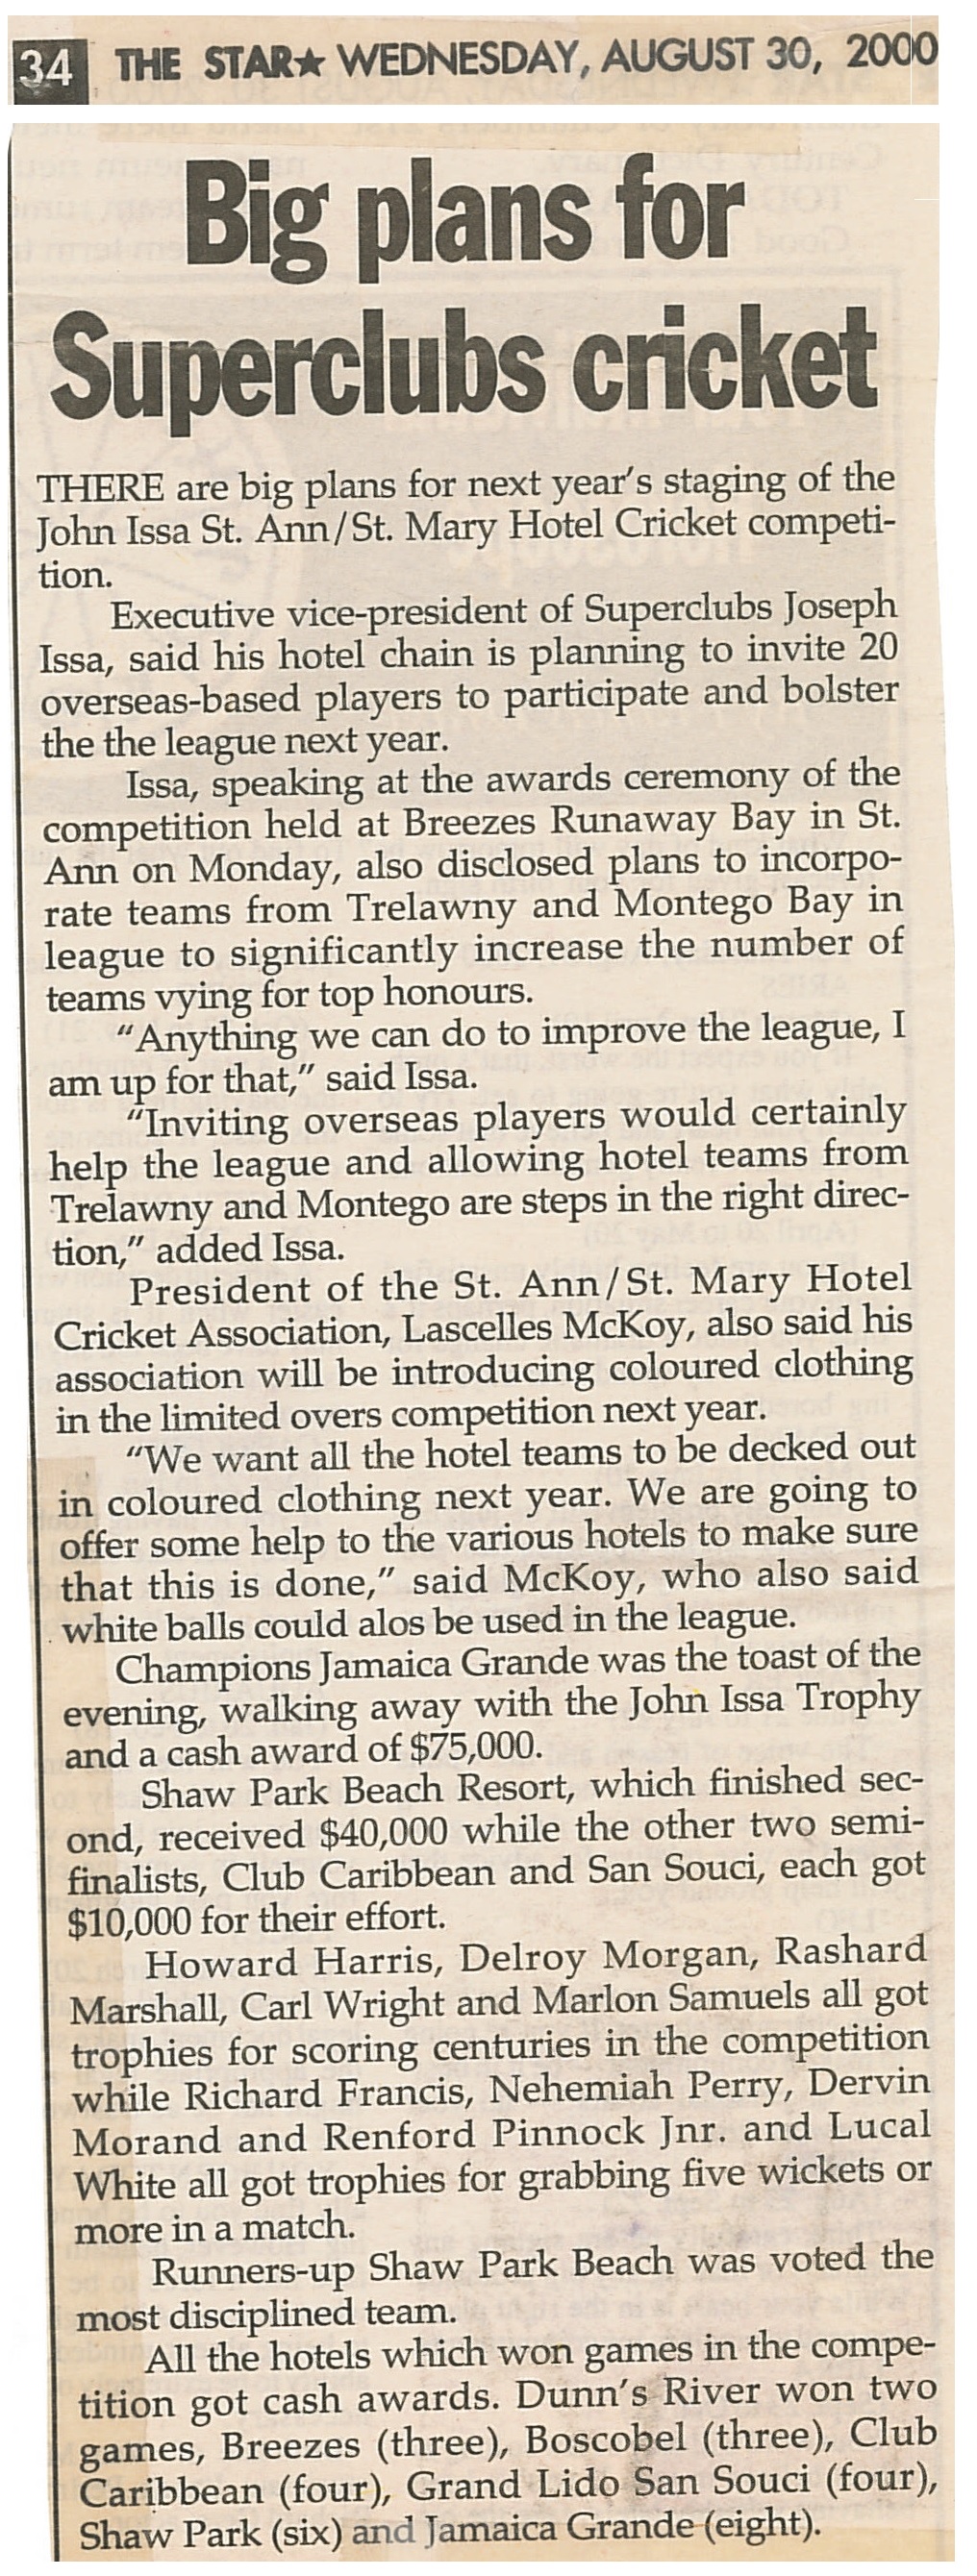 Big plans for SuperClubs cricket - The Star - Aug 30, 2000 